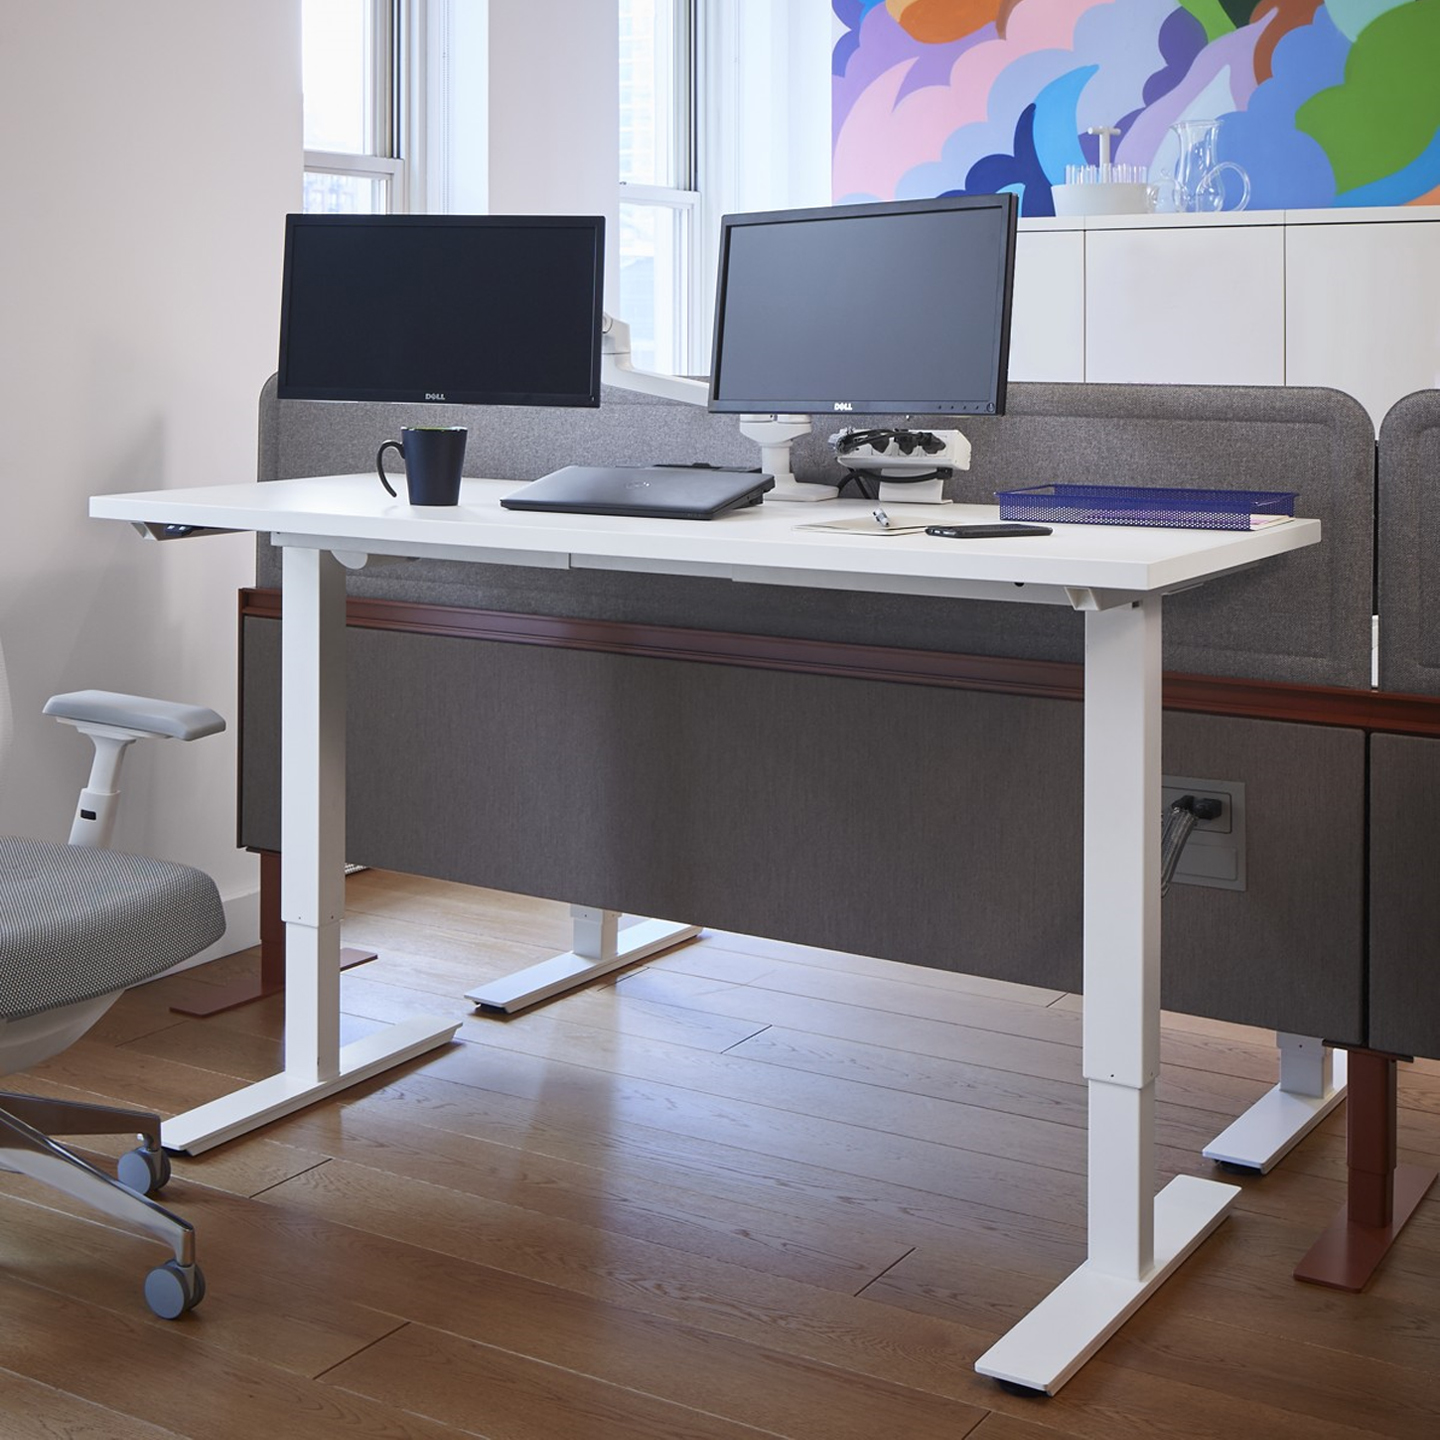 Haworth Height Adjustable Table in a home office space with chair